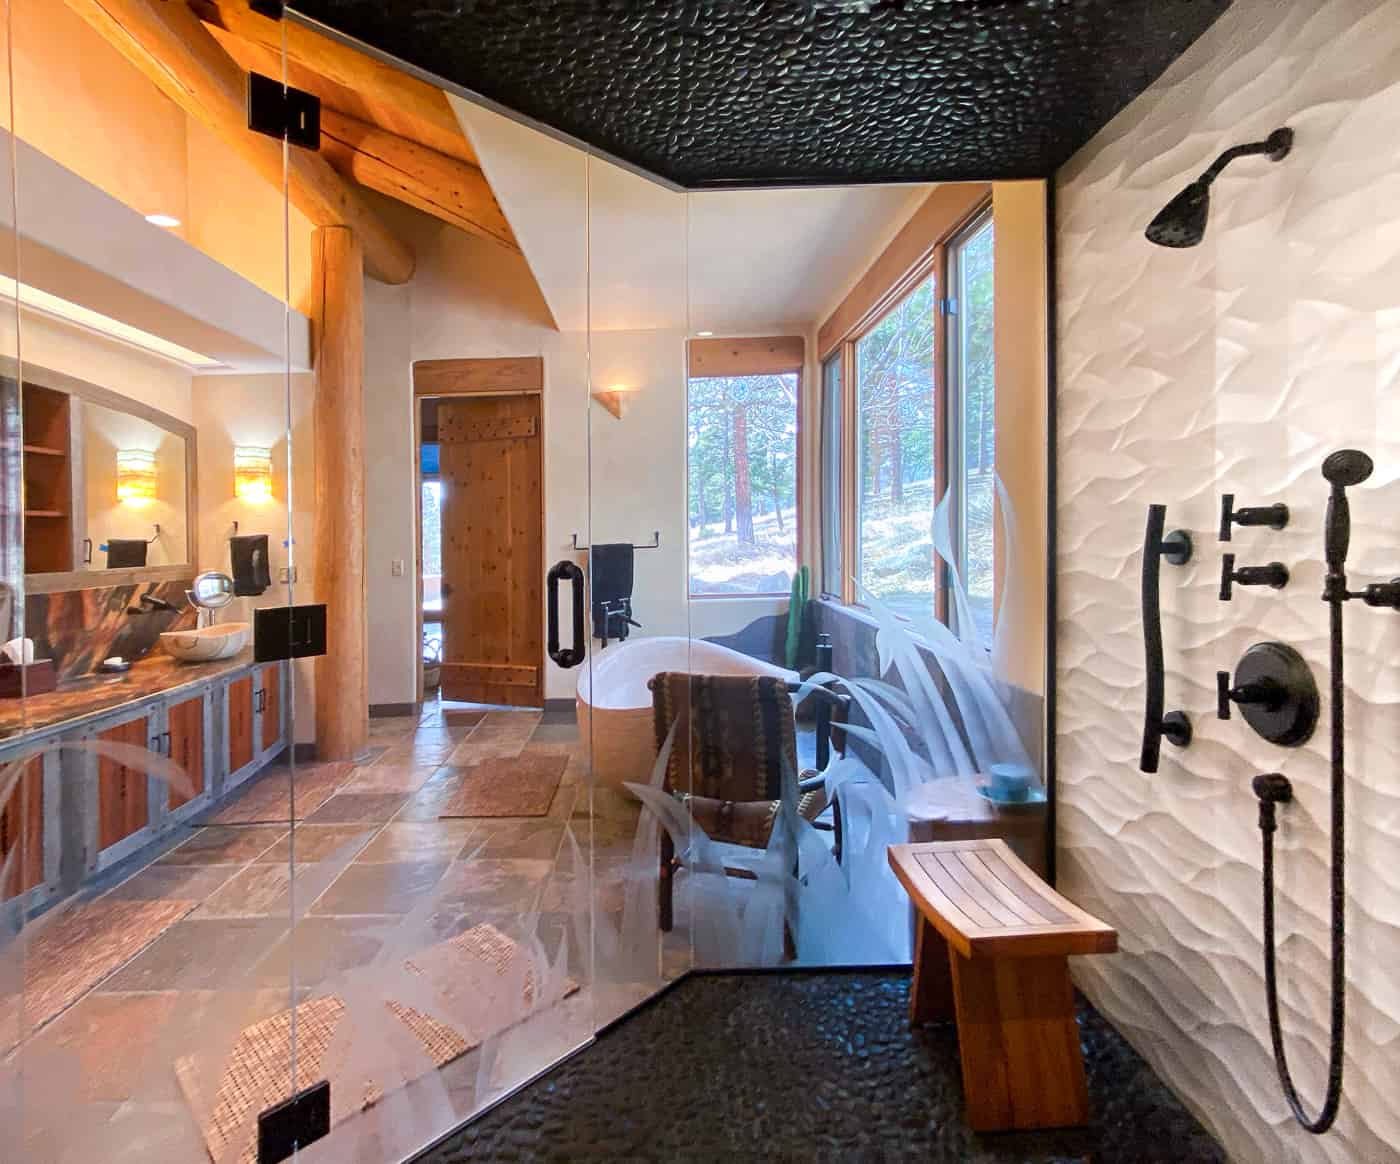 Walk-in shower with pebble floor and ceiling and curved tile walls